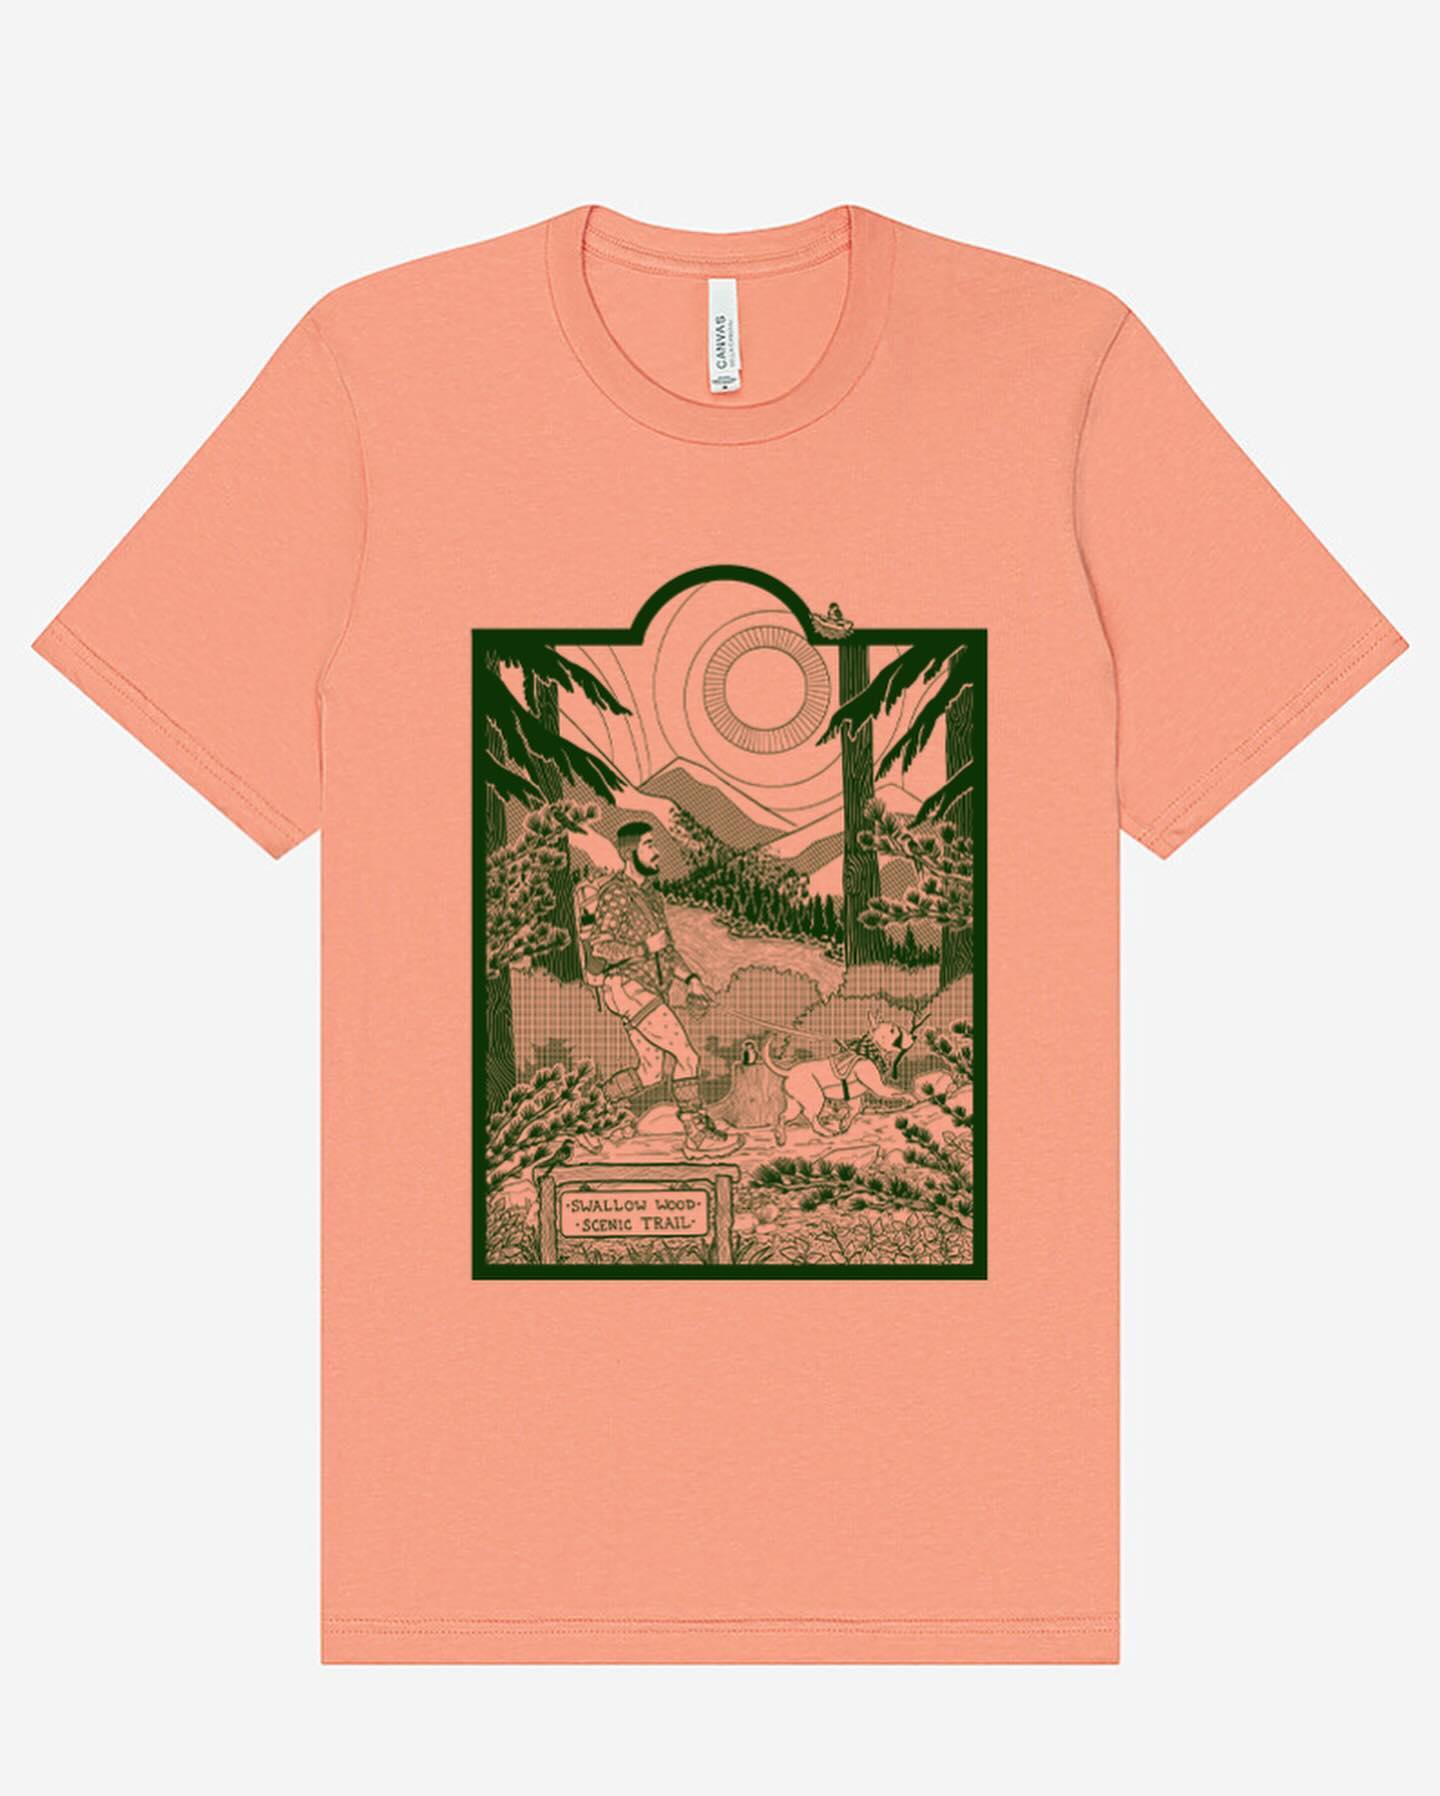 Who is ready to Swallow Wood this summer? My new t-shirt is up for preorder, expected to ship in June. Grab your hiking 